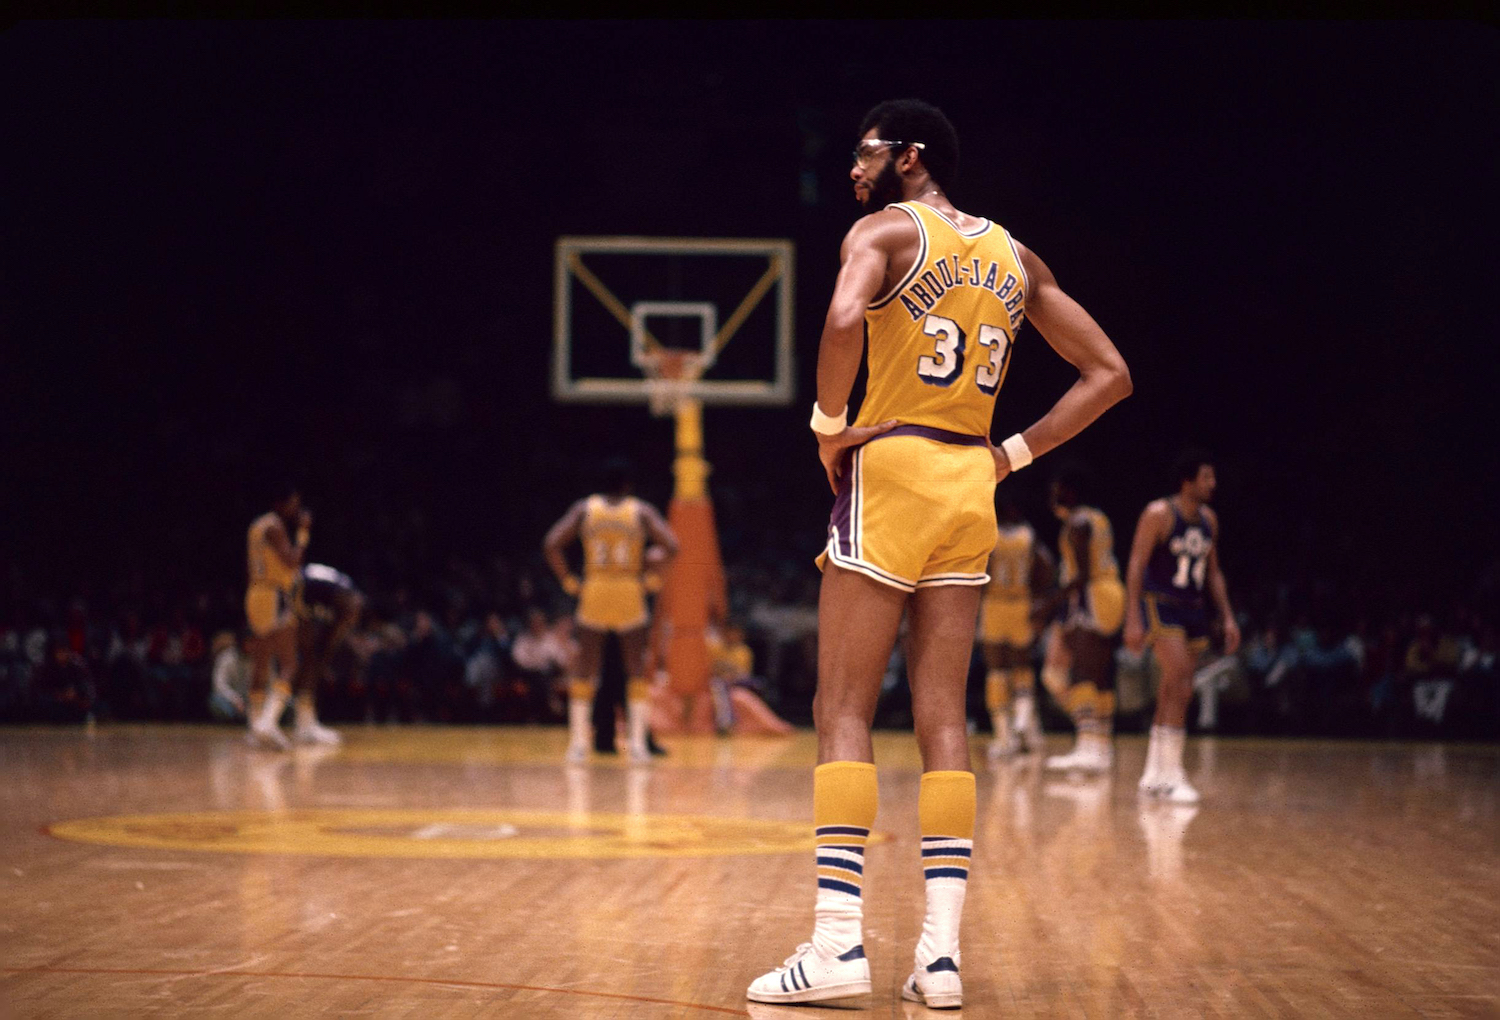 Kareem Abdul-Jabbar, who has a legitimate claim to the NBA GOAT title, stands on the court during a Los Angeles Lakers game.